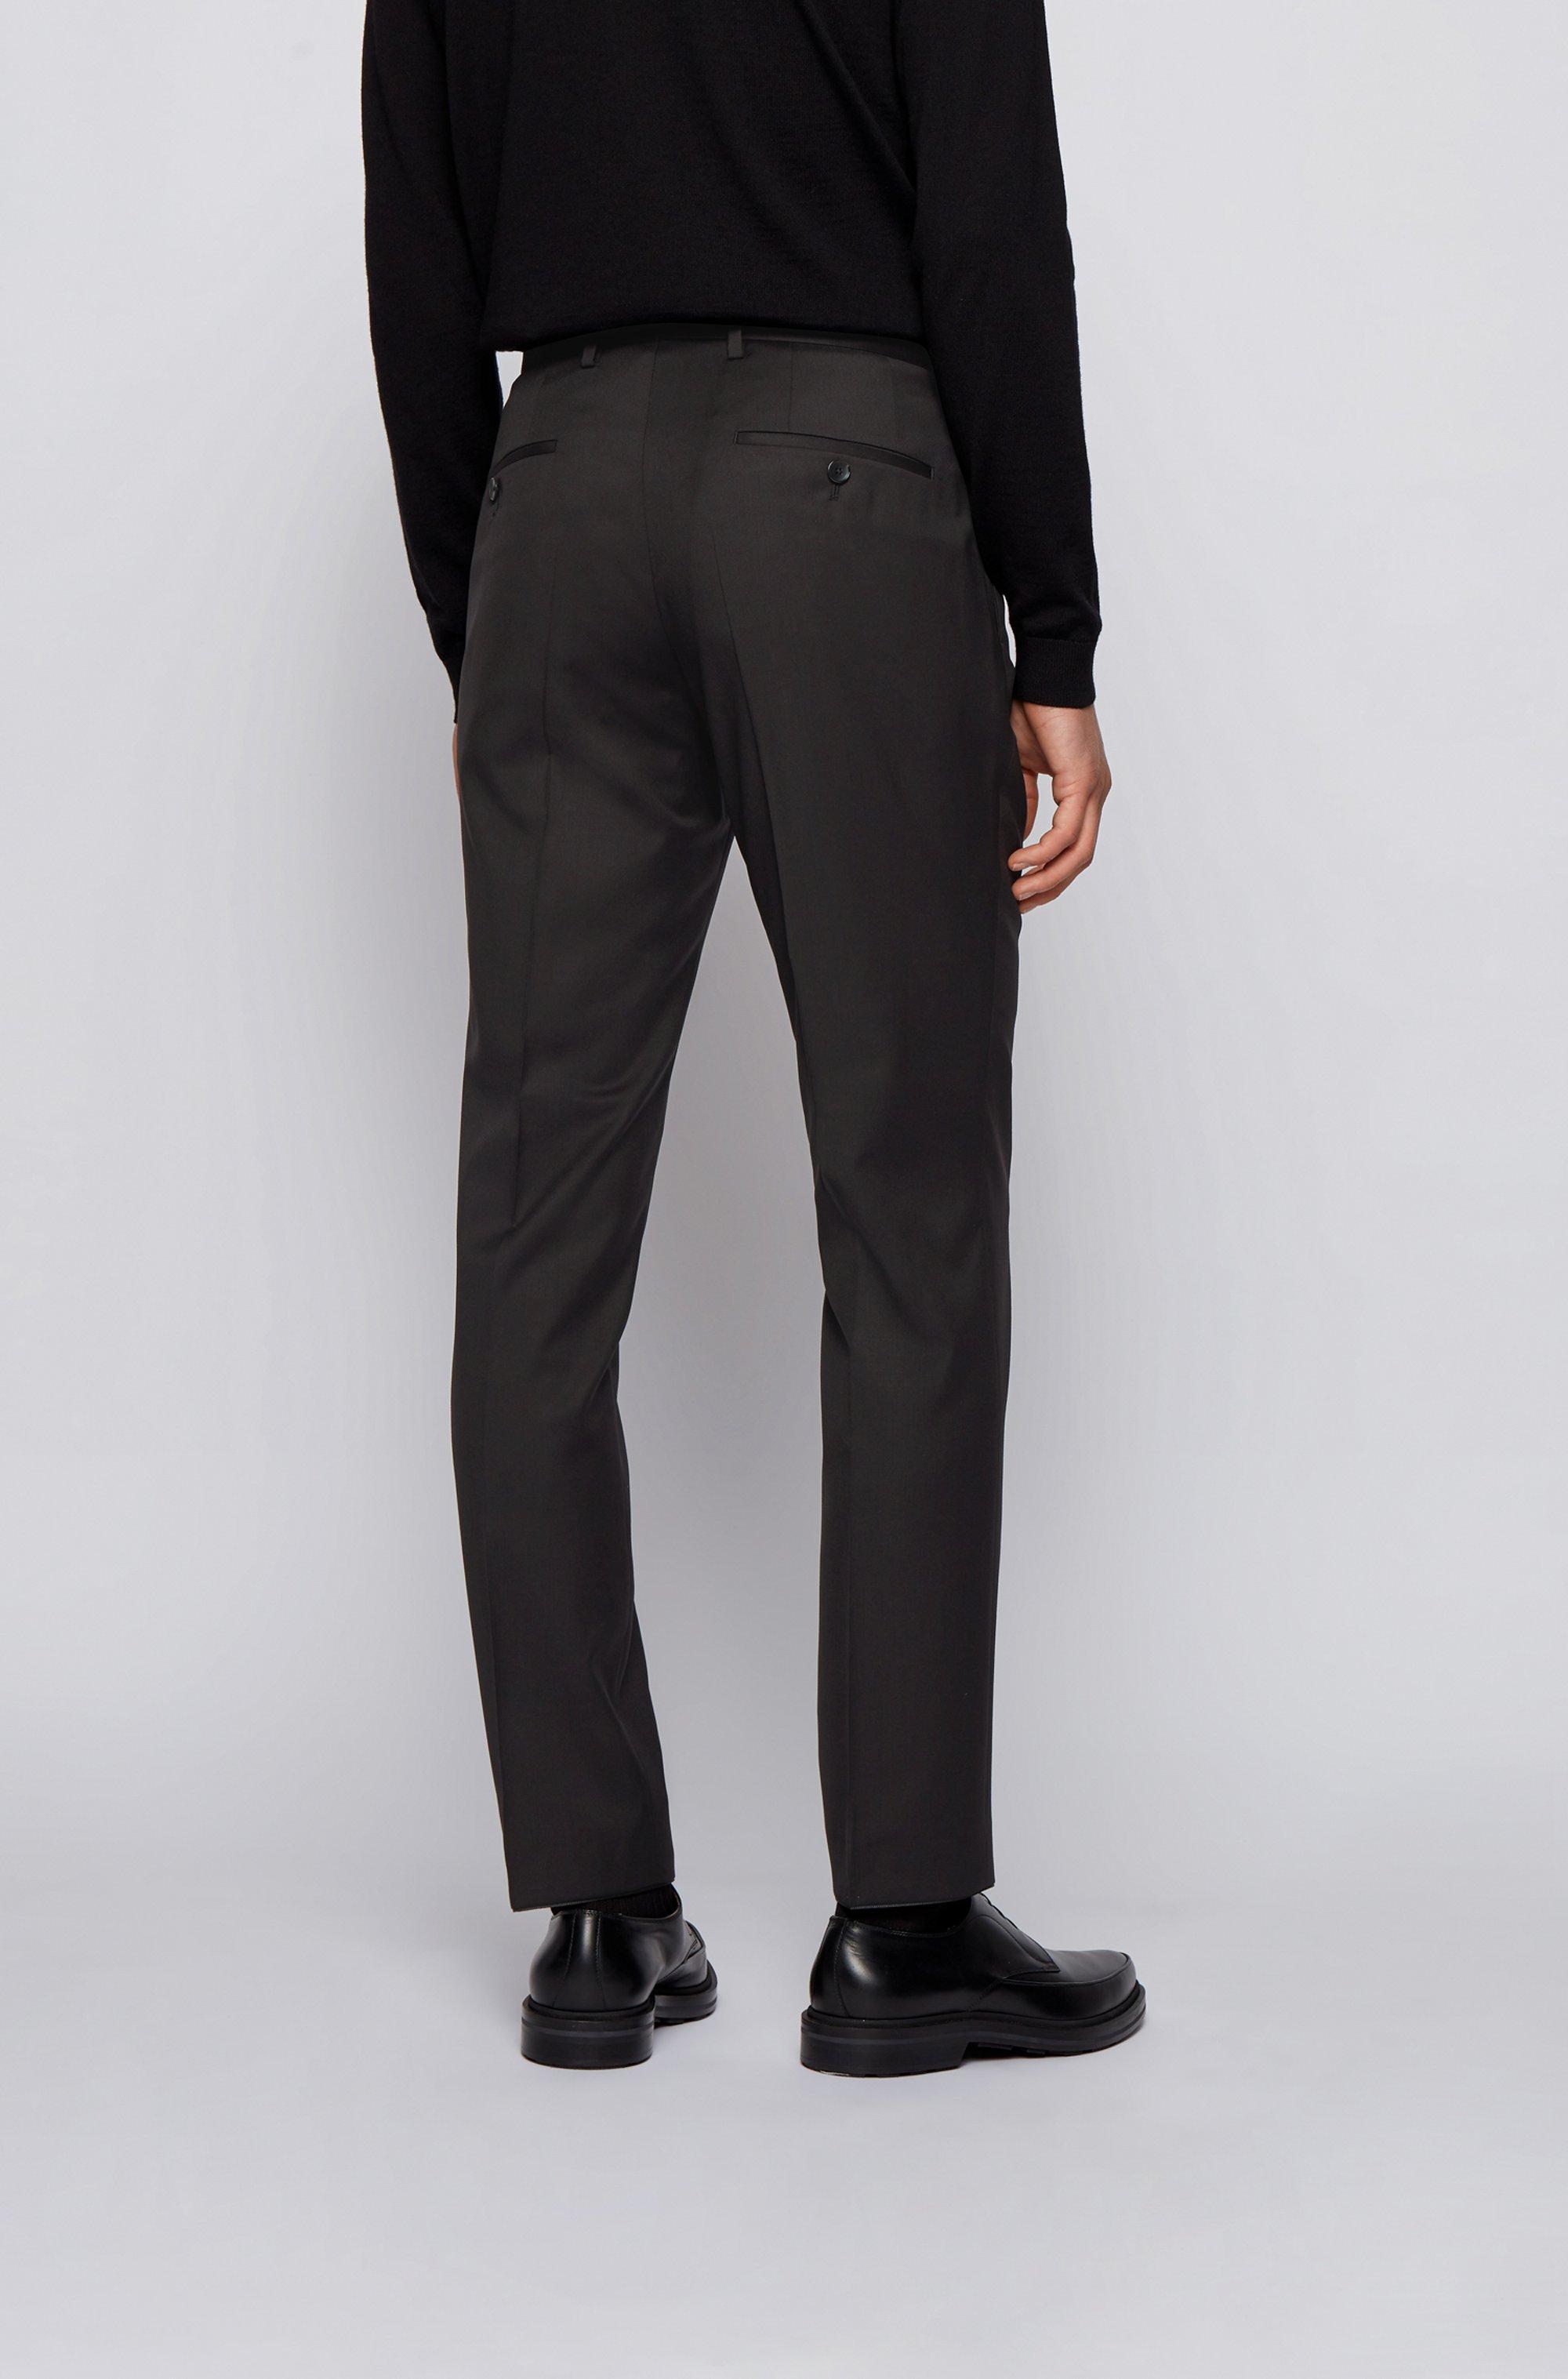 Gibson London Slim Fit Grey, Black and Teal Graph Check Trousers